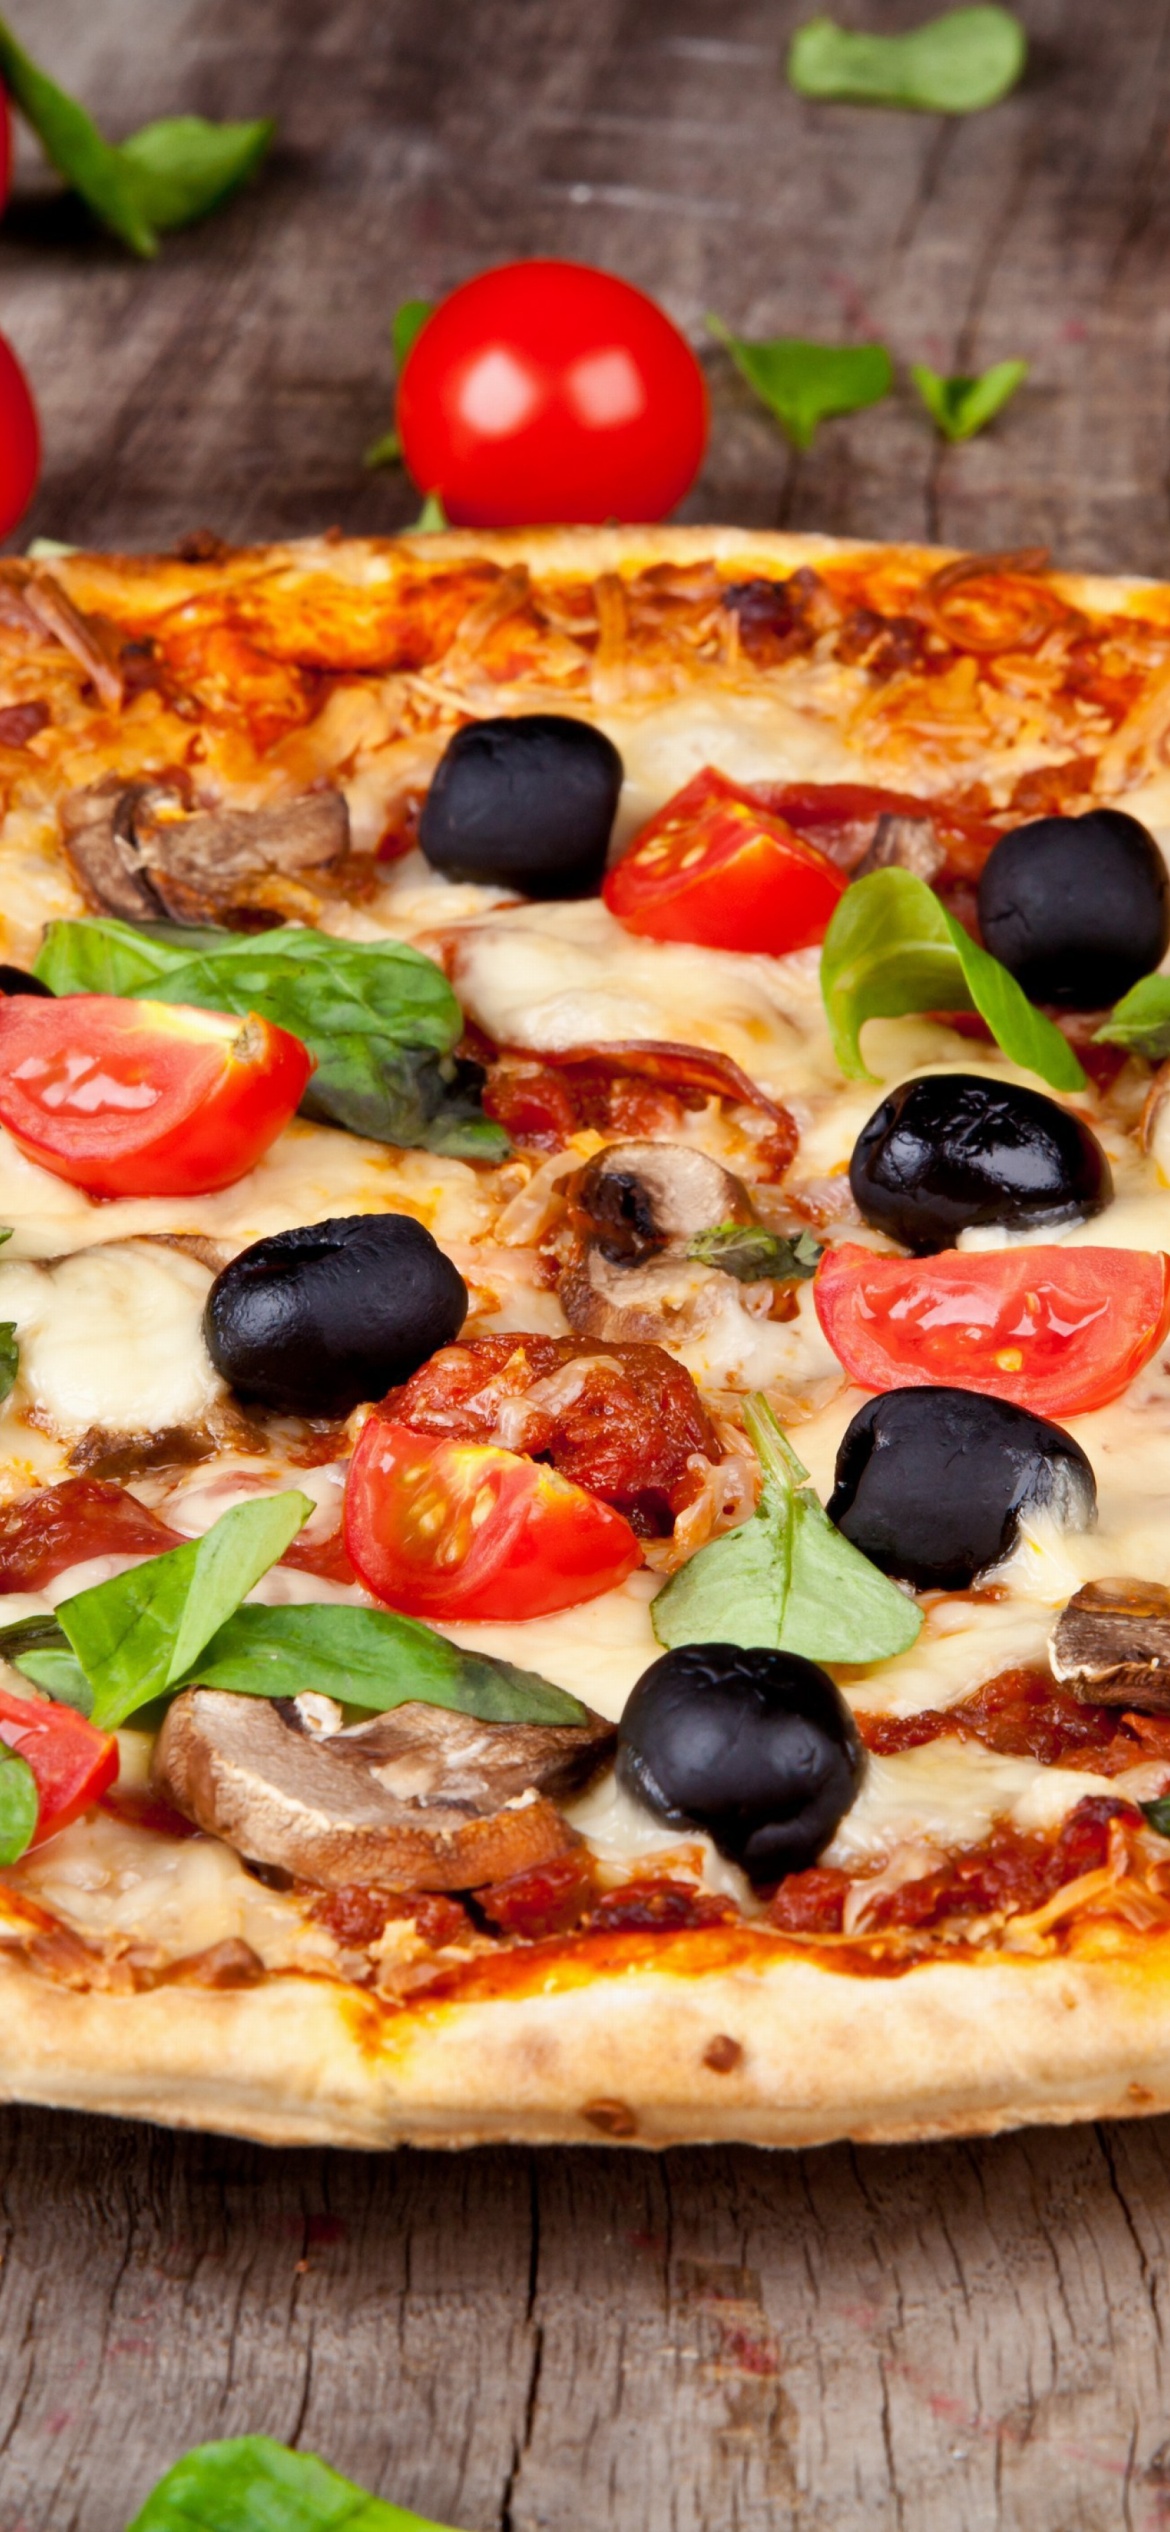 Pizza with tomatoes and olives screenshot #1 1170x2532